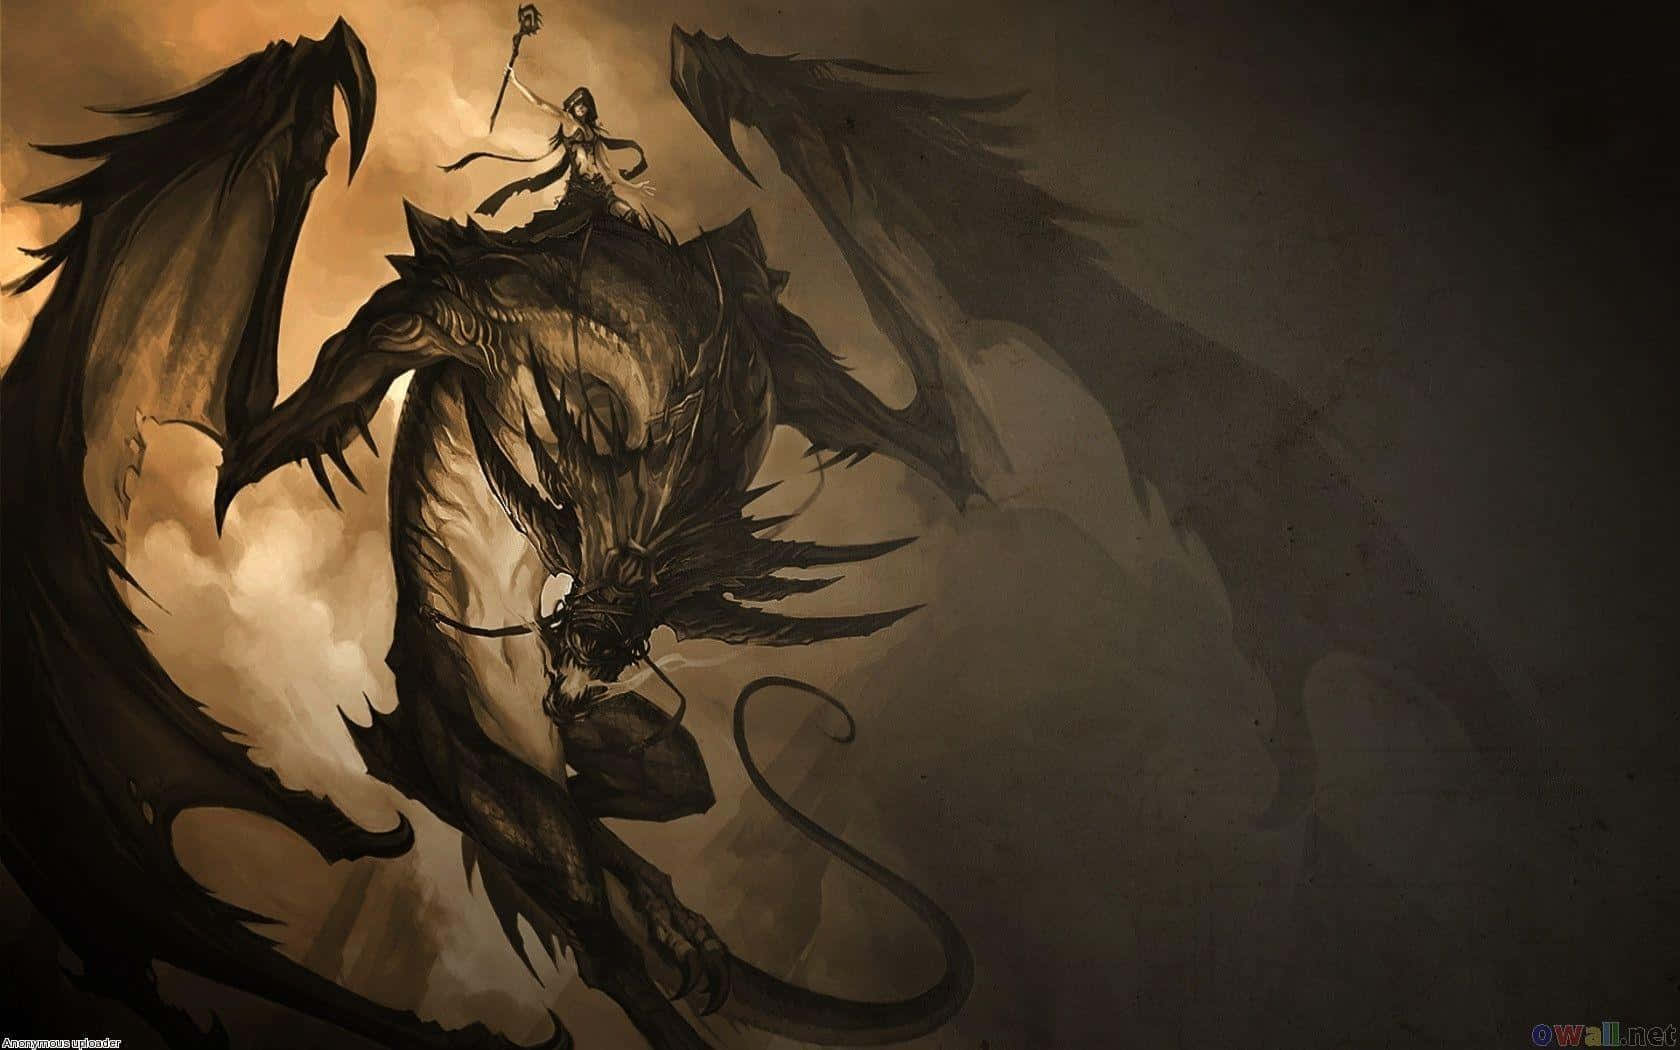 The might of the Black Dragon Wallpaper